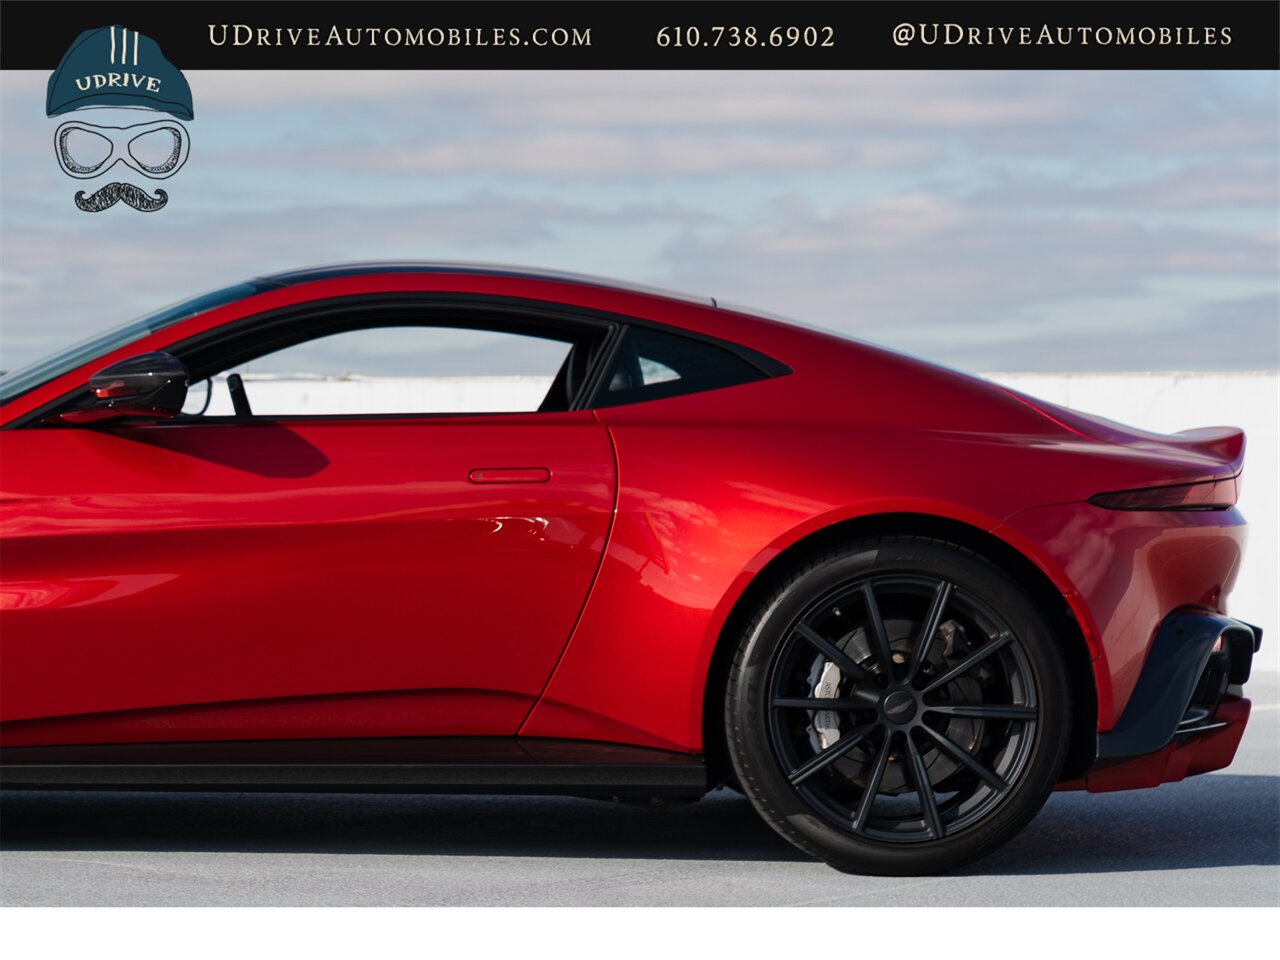 2019 Aston Martin Vantage  Incredibly Spec Rare Q Exclusive Fiamma Red $222k MSRP 1 of a Kind CPO - Photo 29 - West Chester, PA 19382